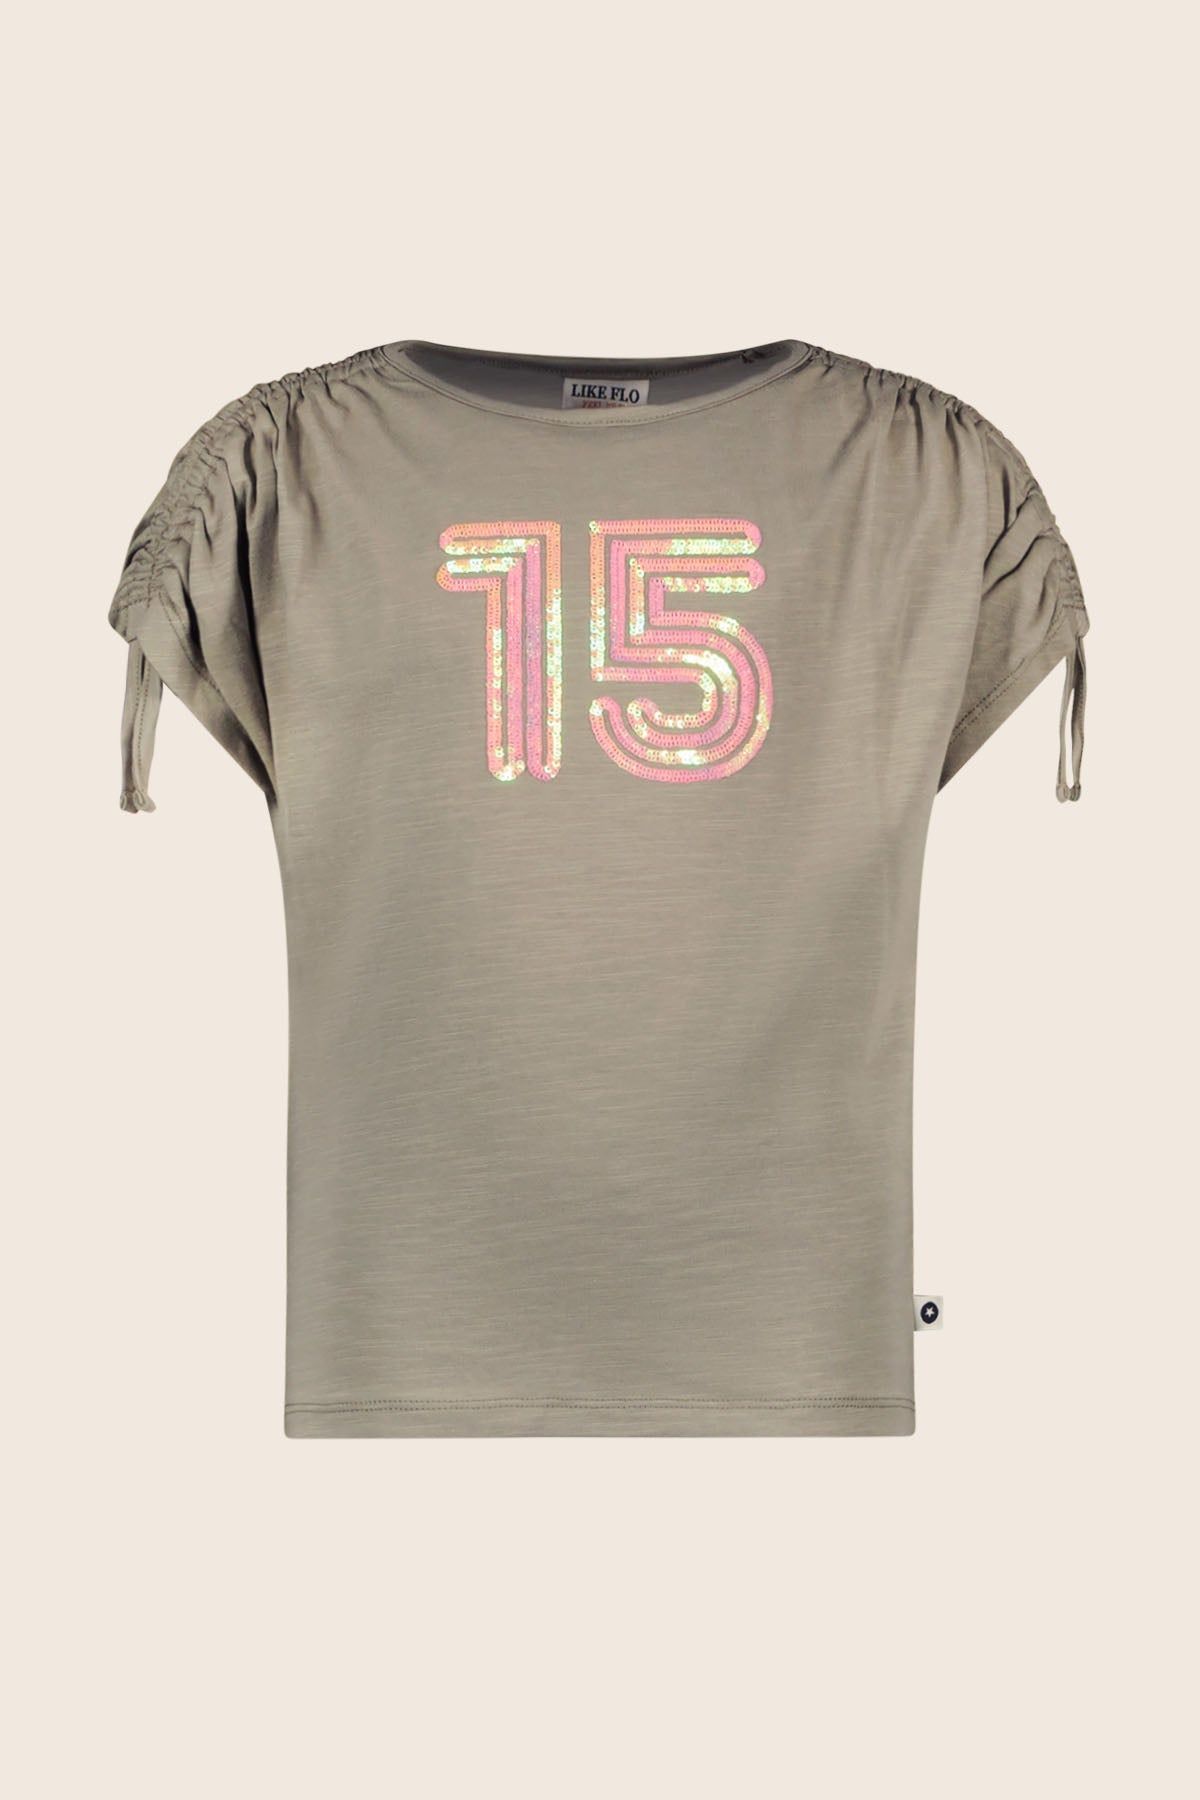 T-Shirt top GRACE army